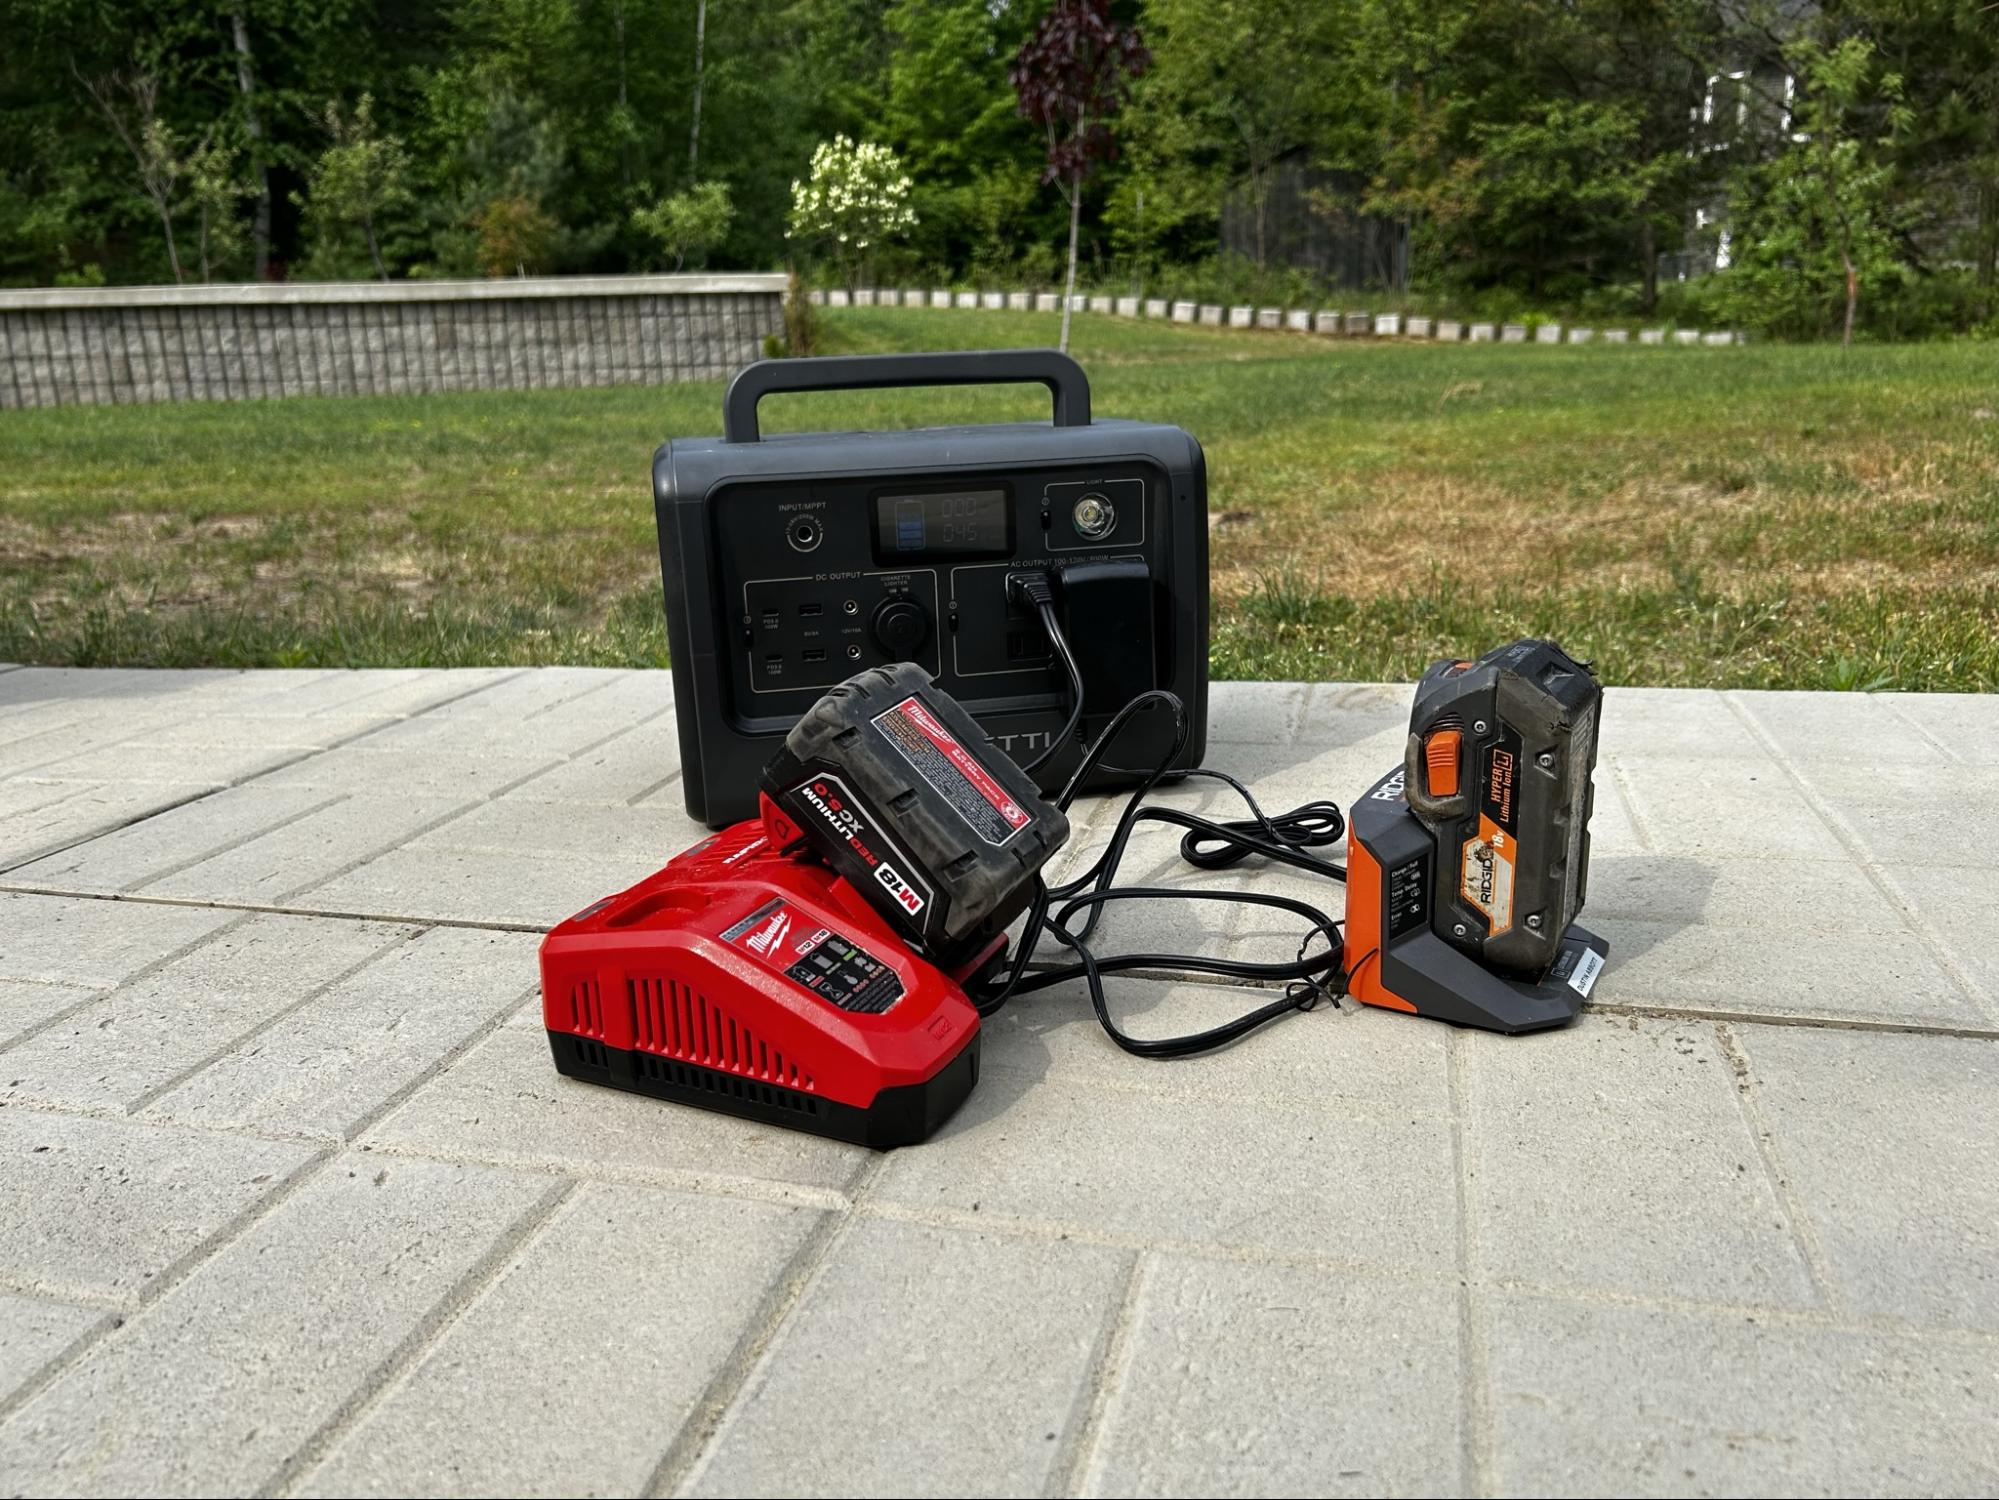 bluetti products with power tool